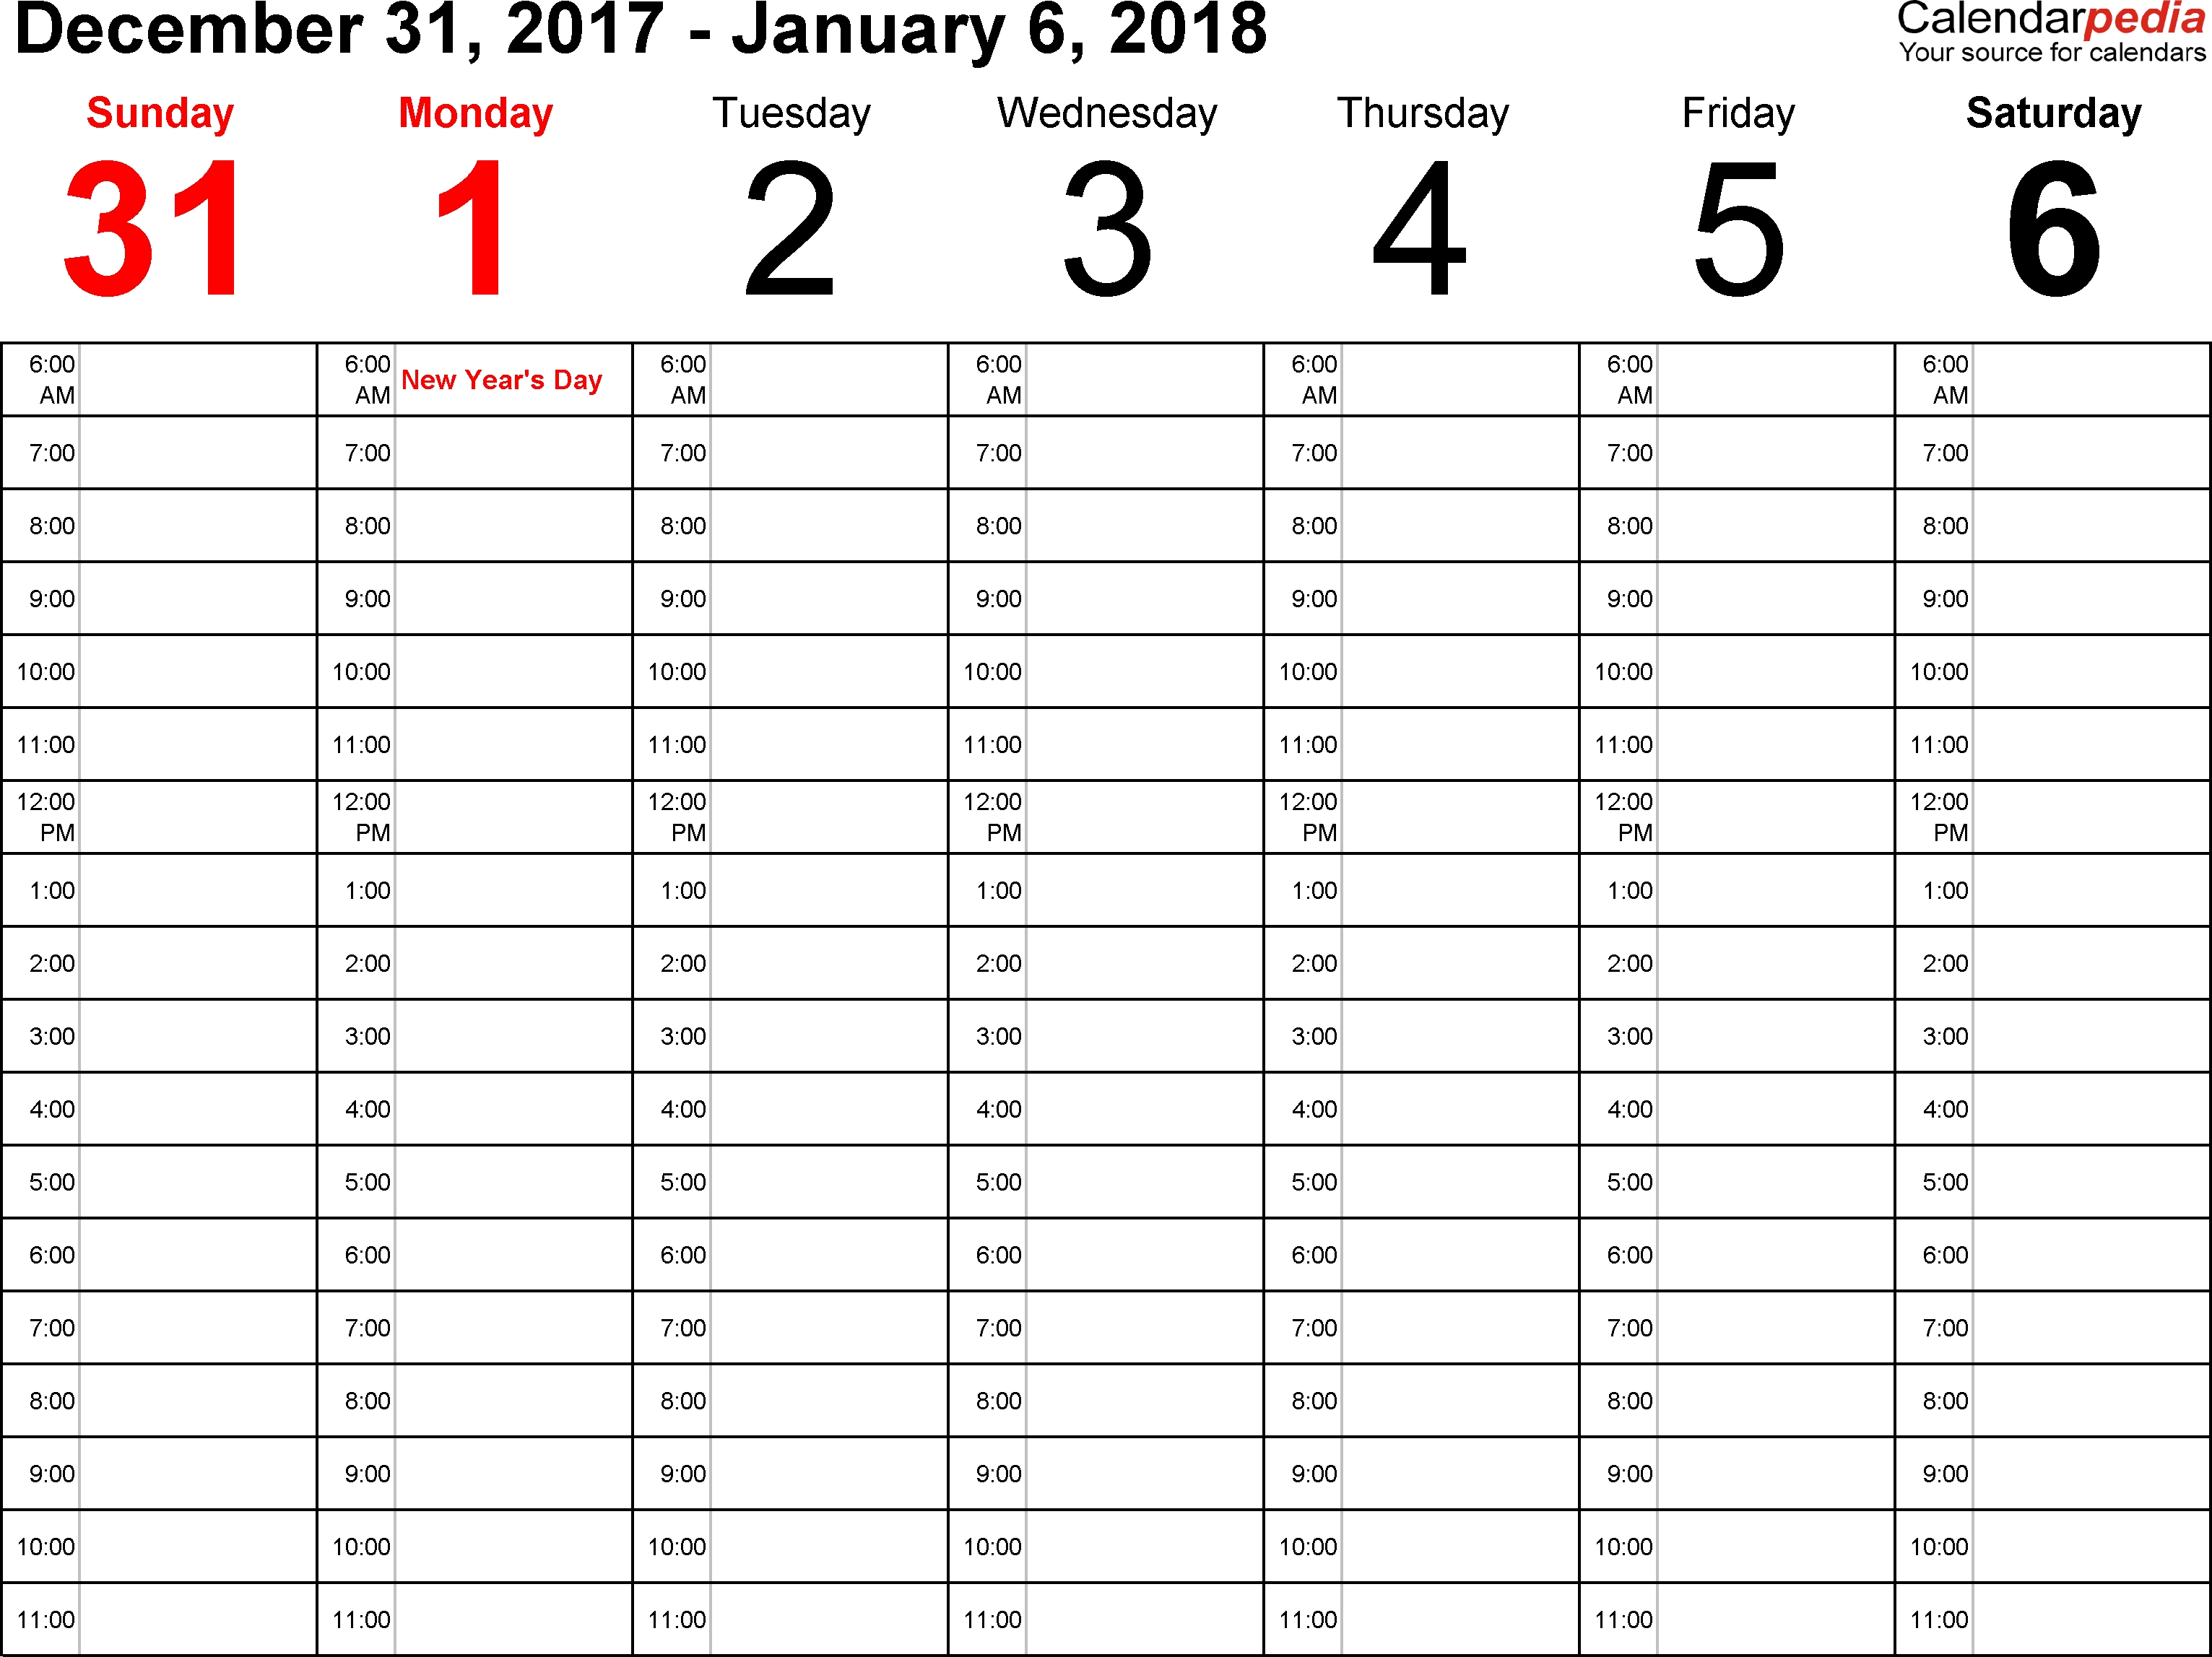 Weekly Calendar 2018 For Word - 12 Free Printable Templates in Blank Weekly Calendar With Times